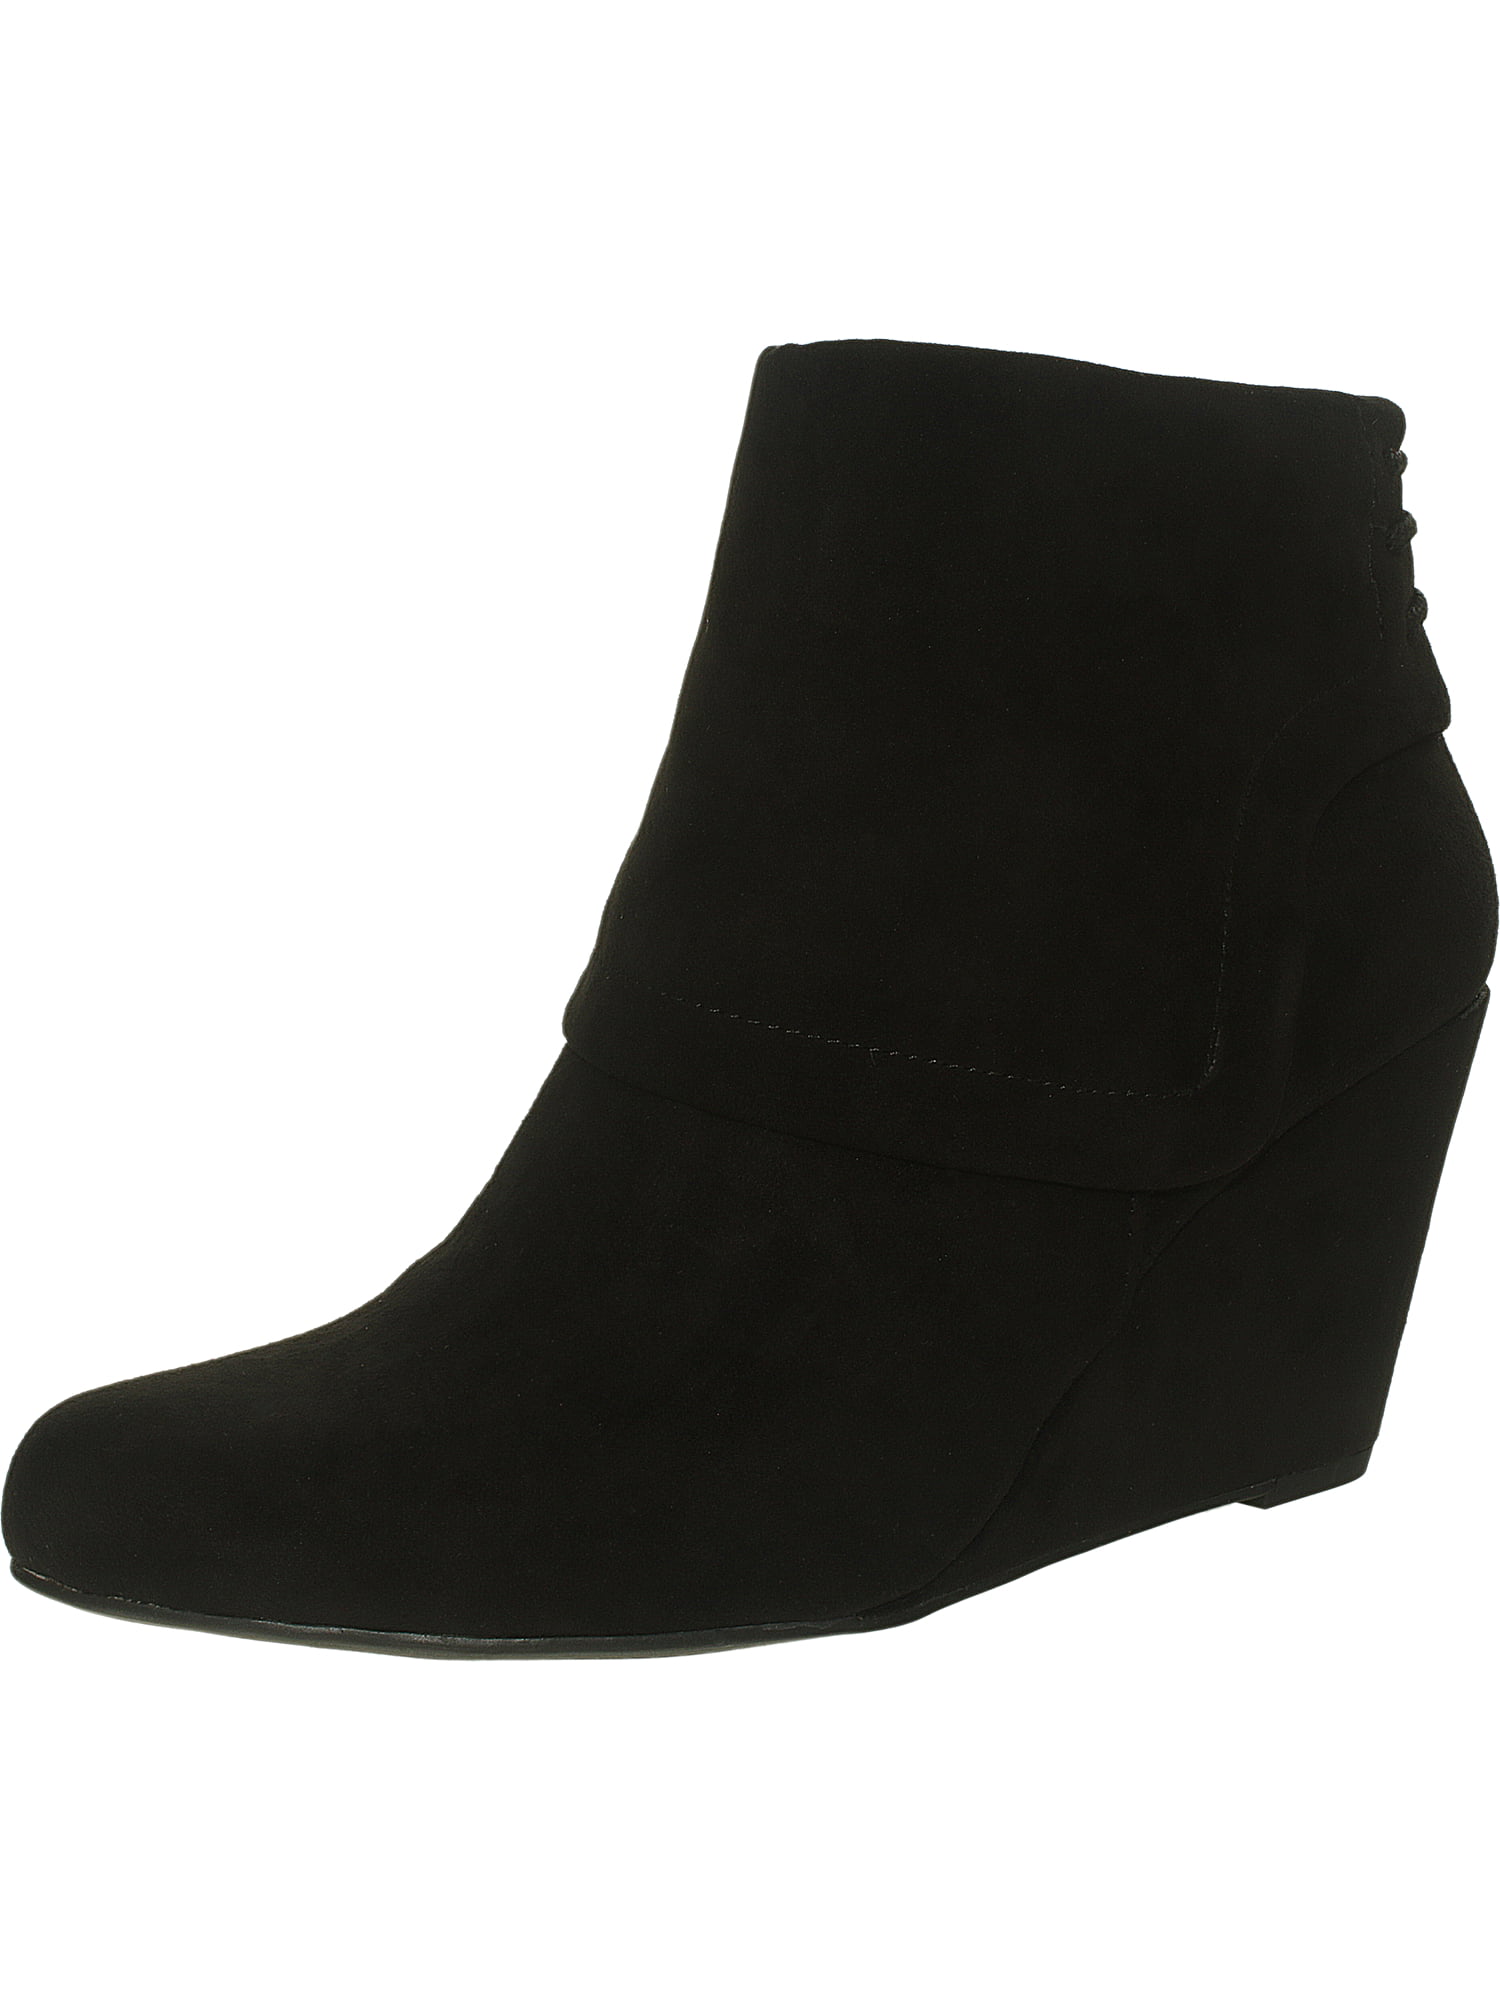 Jessica Simpson Women's Reaca Suede Black Ankle-High Boot - 6.5M ...